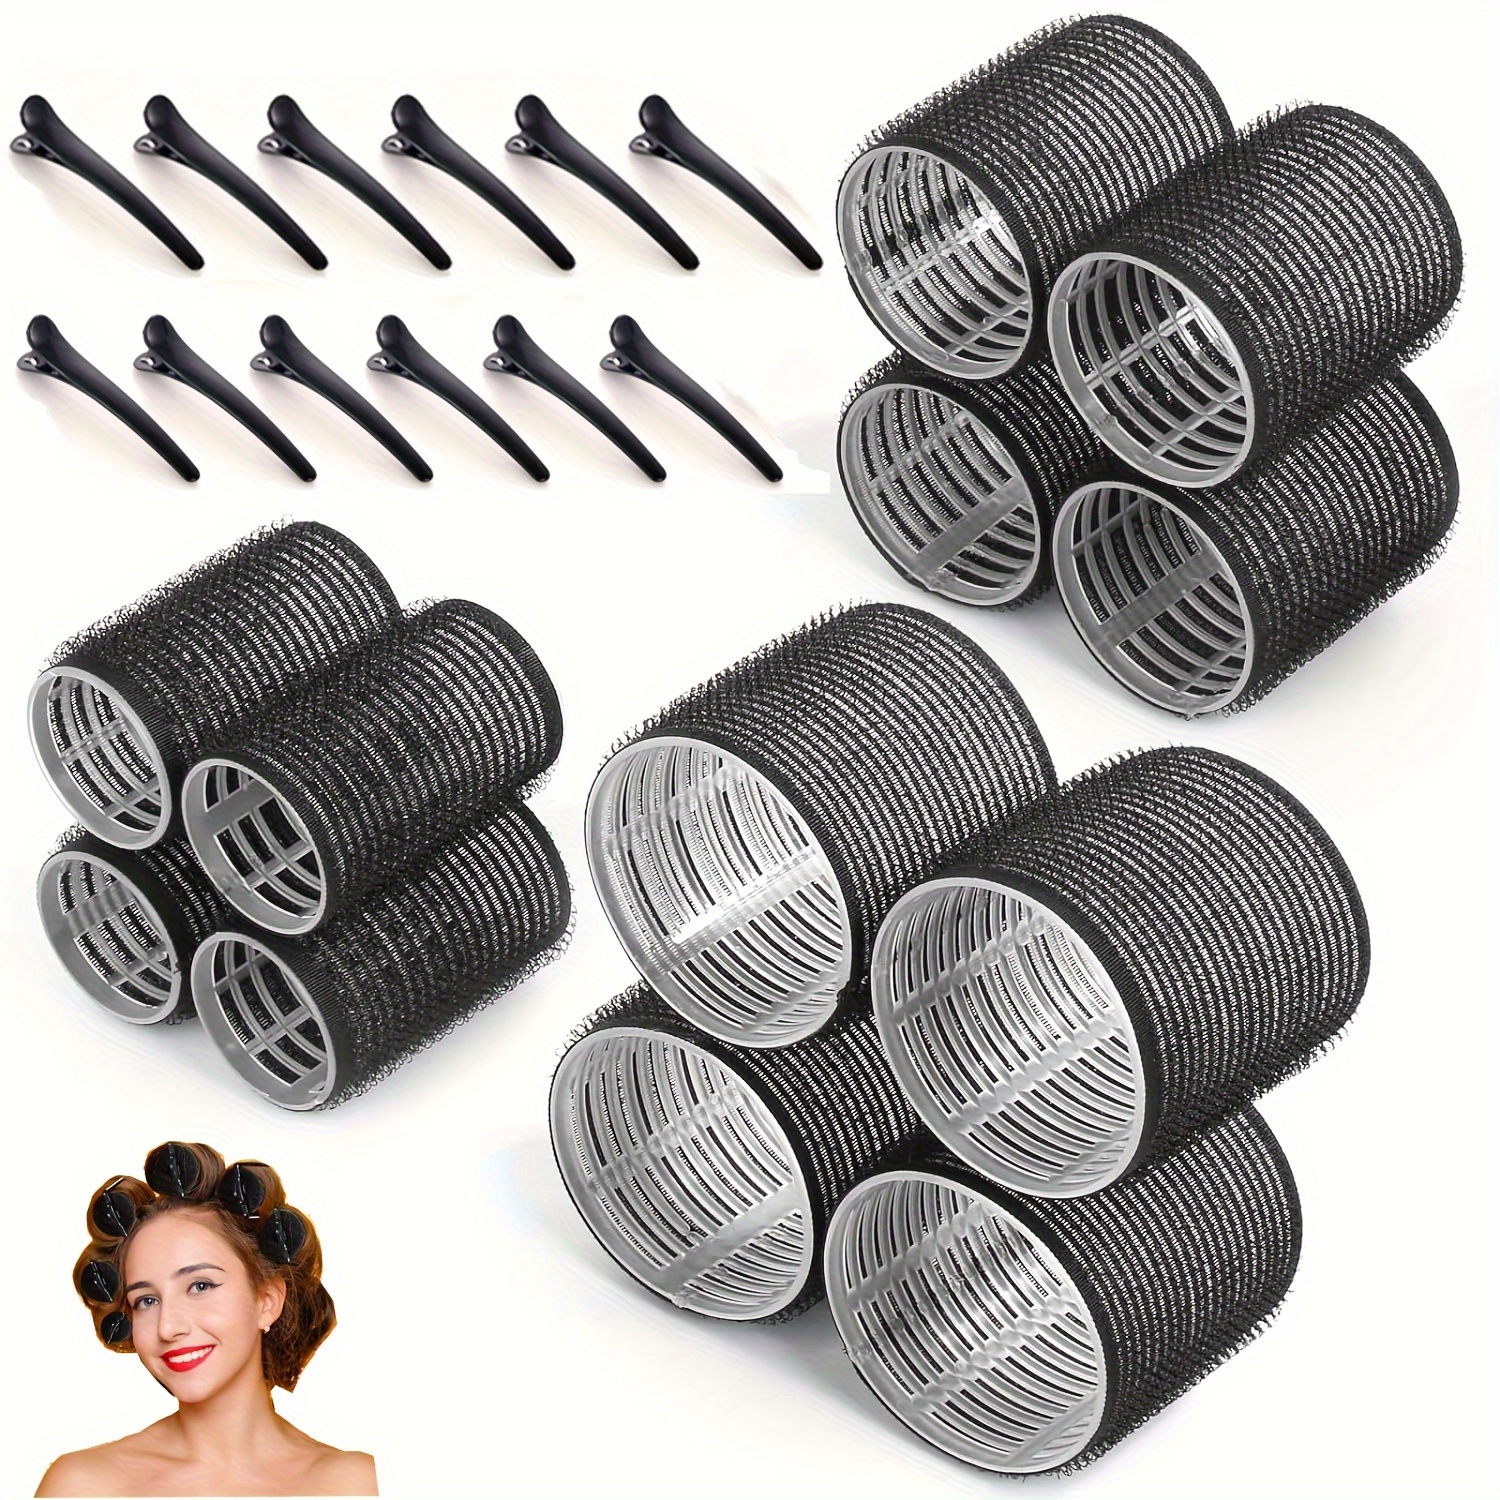 

Jumbo Hair Curlers Rollers 24pcs/set Self-grip Rollers Kit With12rollers And 12clips, Salon Quality Curlers For Diy Hairstyling, Heatless Rollers